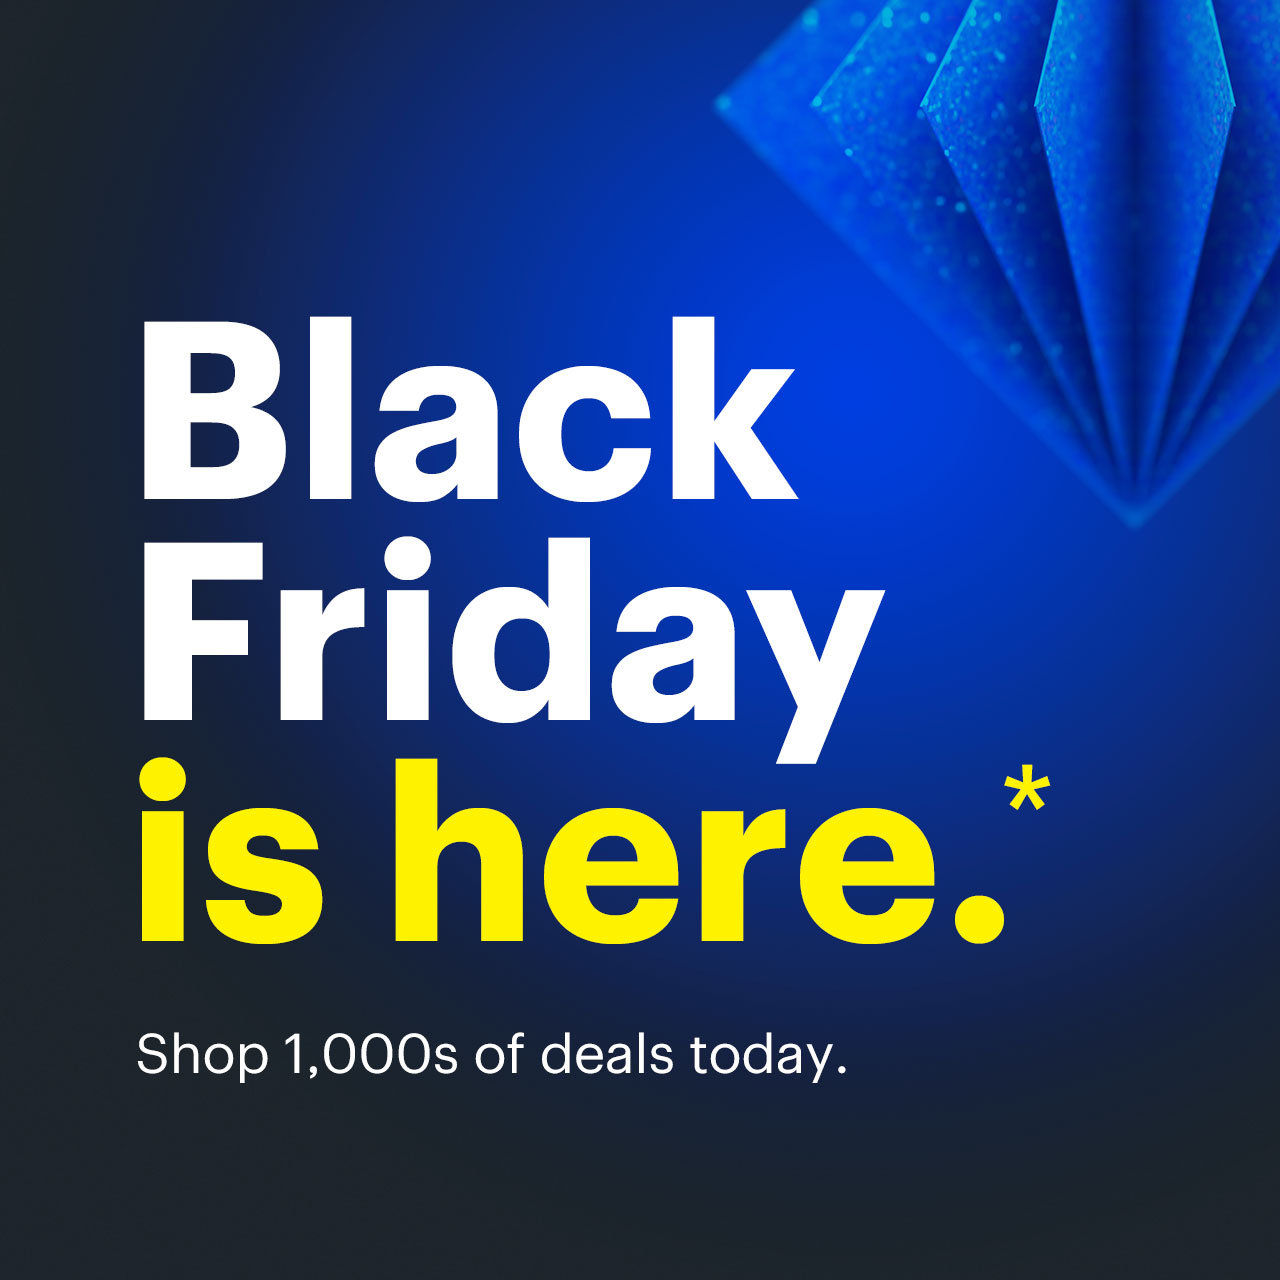 Black Friday is here. Also, My Best Buy Plus and My Best Buy Total members get more Black Friday Deals. Reference disclaimer.